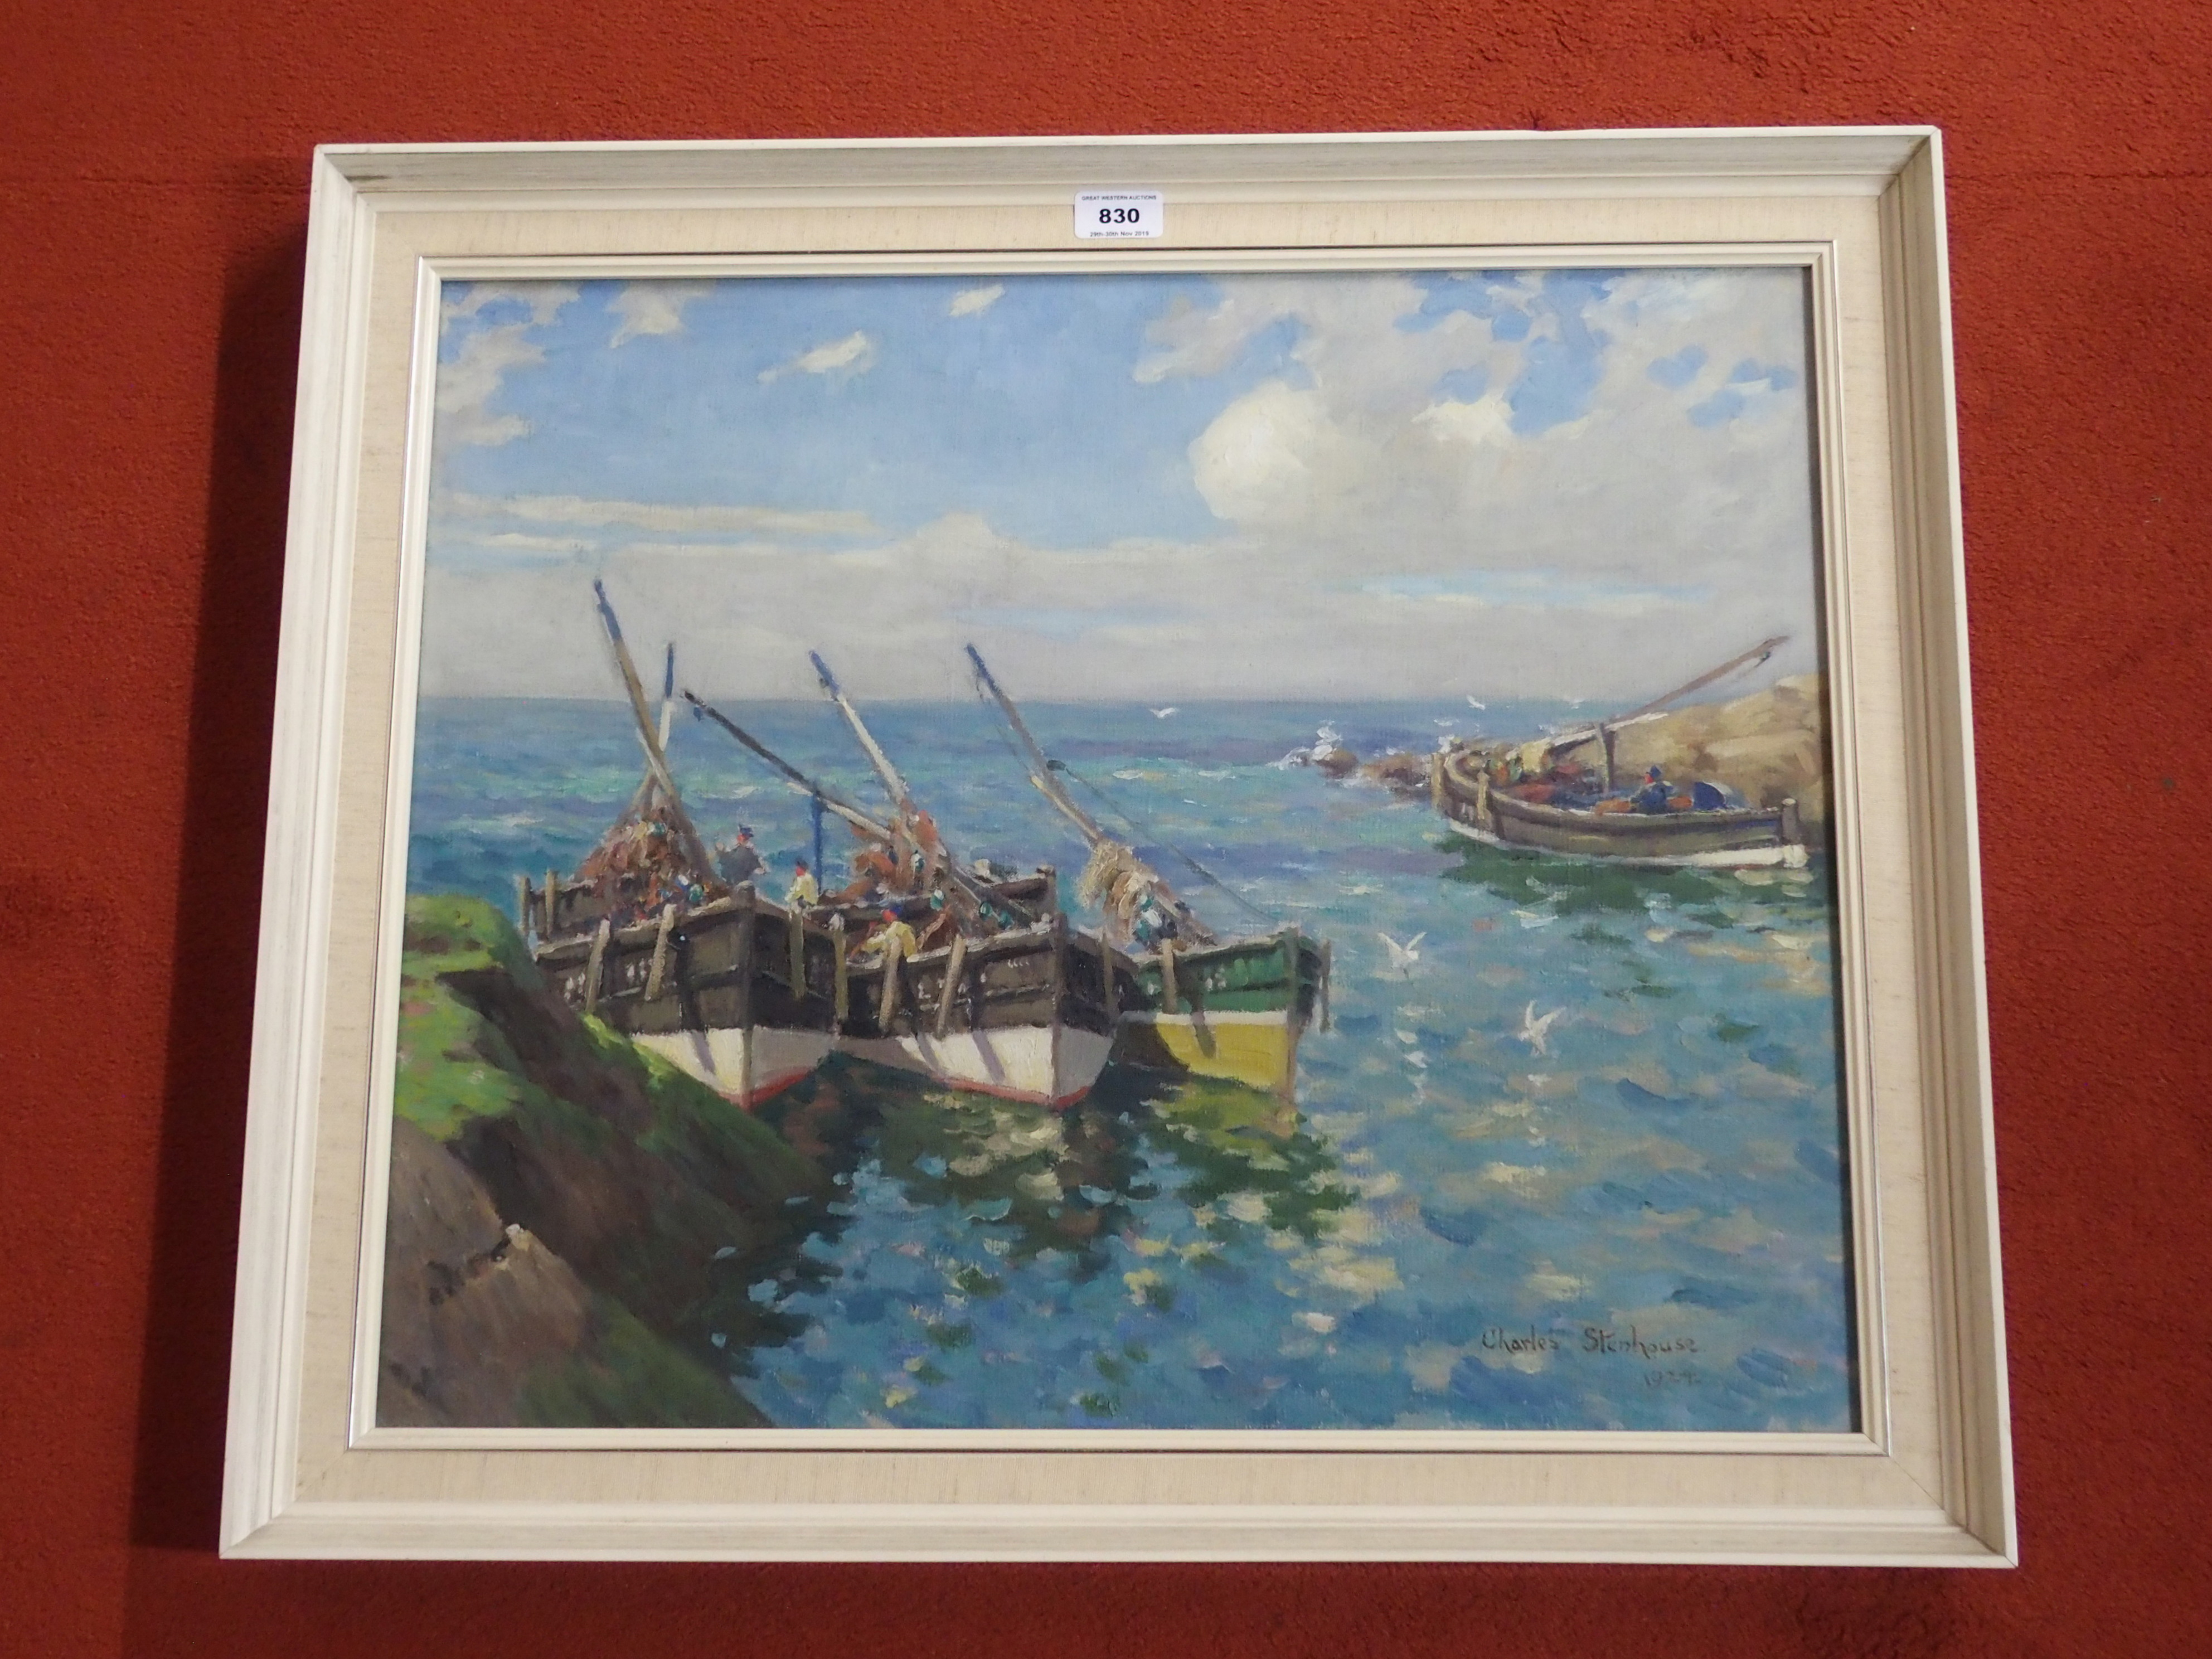 CHARLES STENHOUSE (SCOTTISH 1878-C.1946) FISHING BOATS AT HARBOUR Oil on canvas, signed and dated - Image 3 of 8